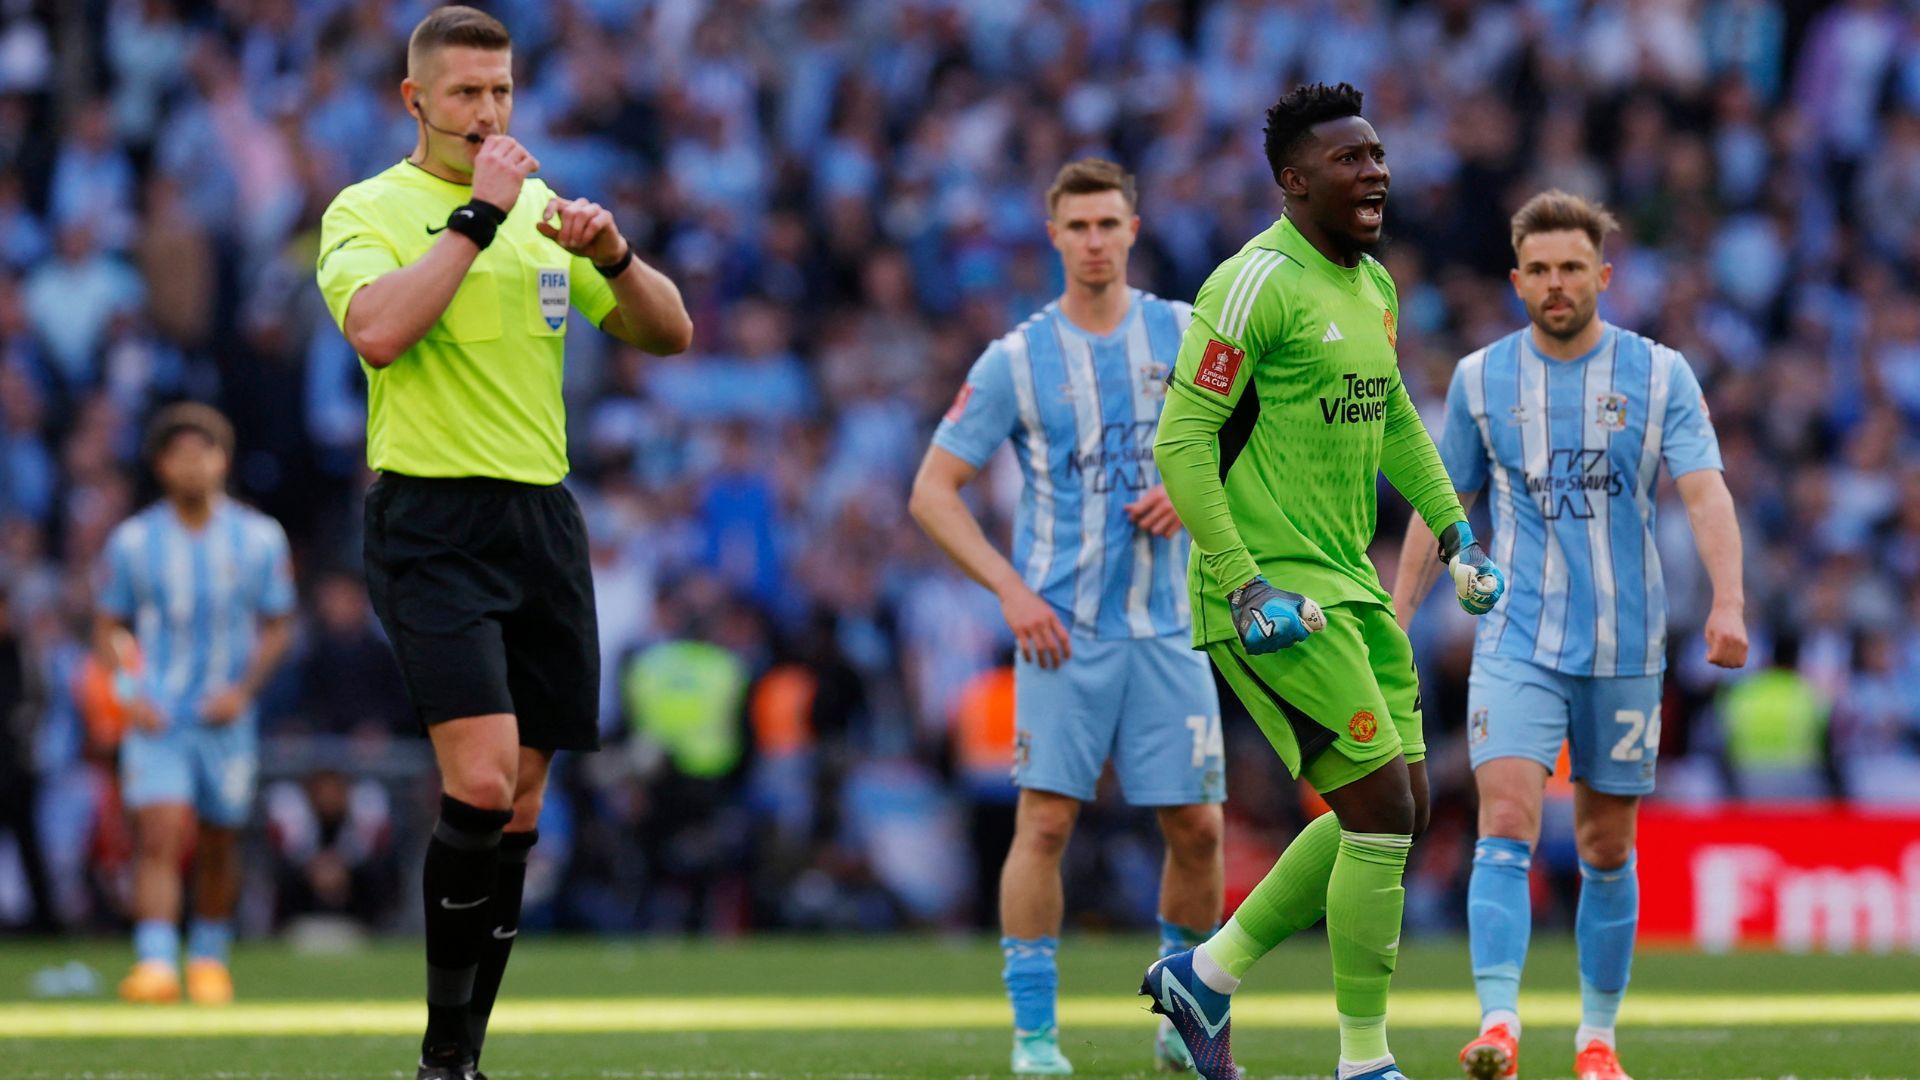 Coventry City's fourth goal is disallowed against Manchester United